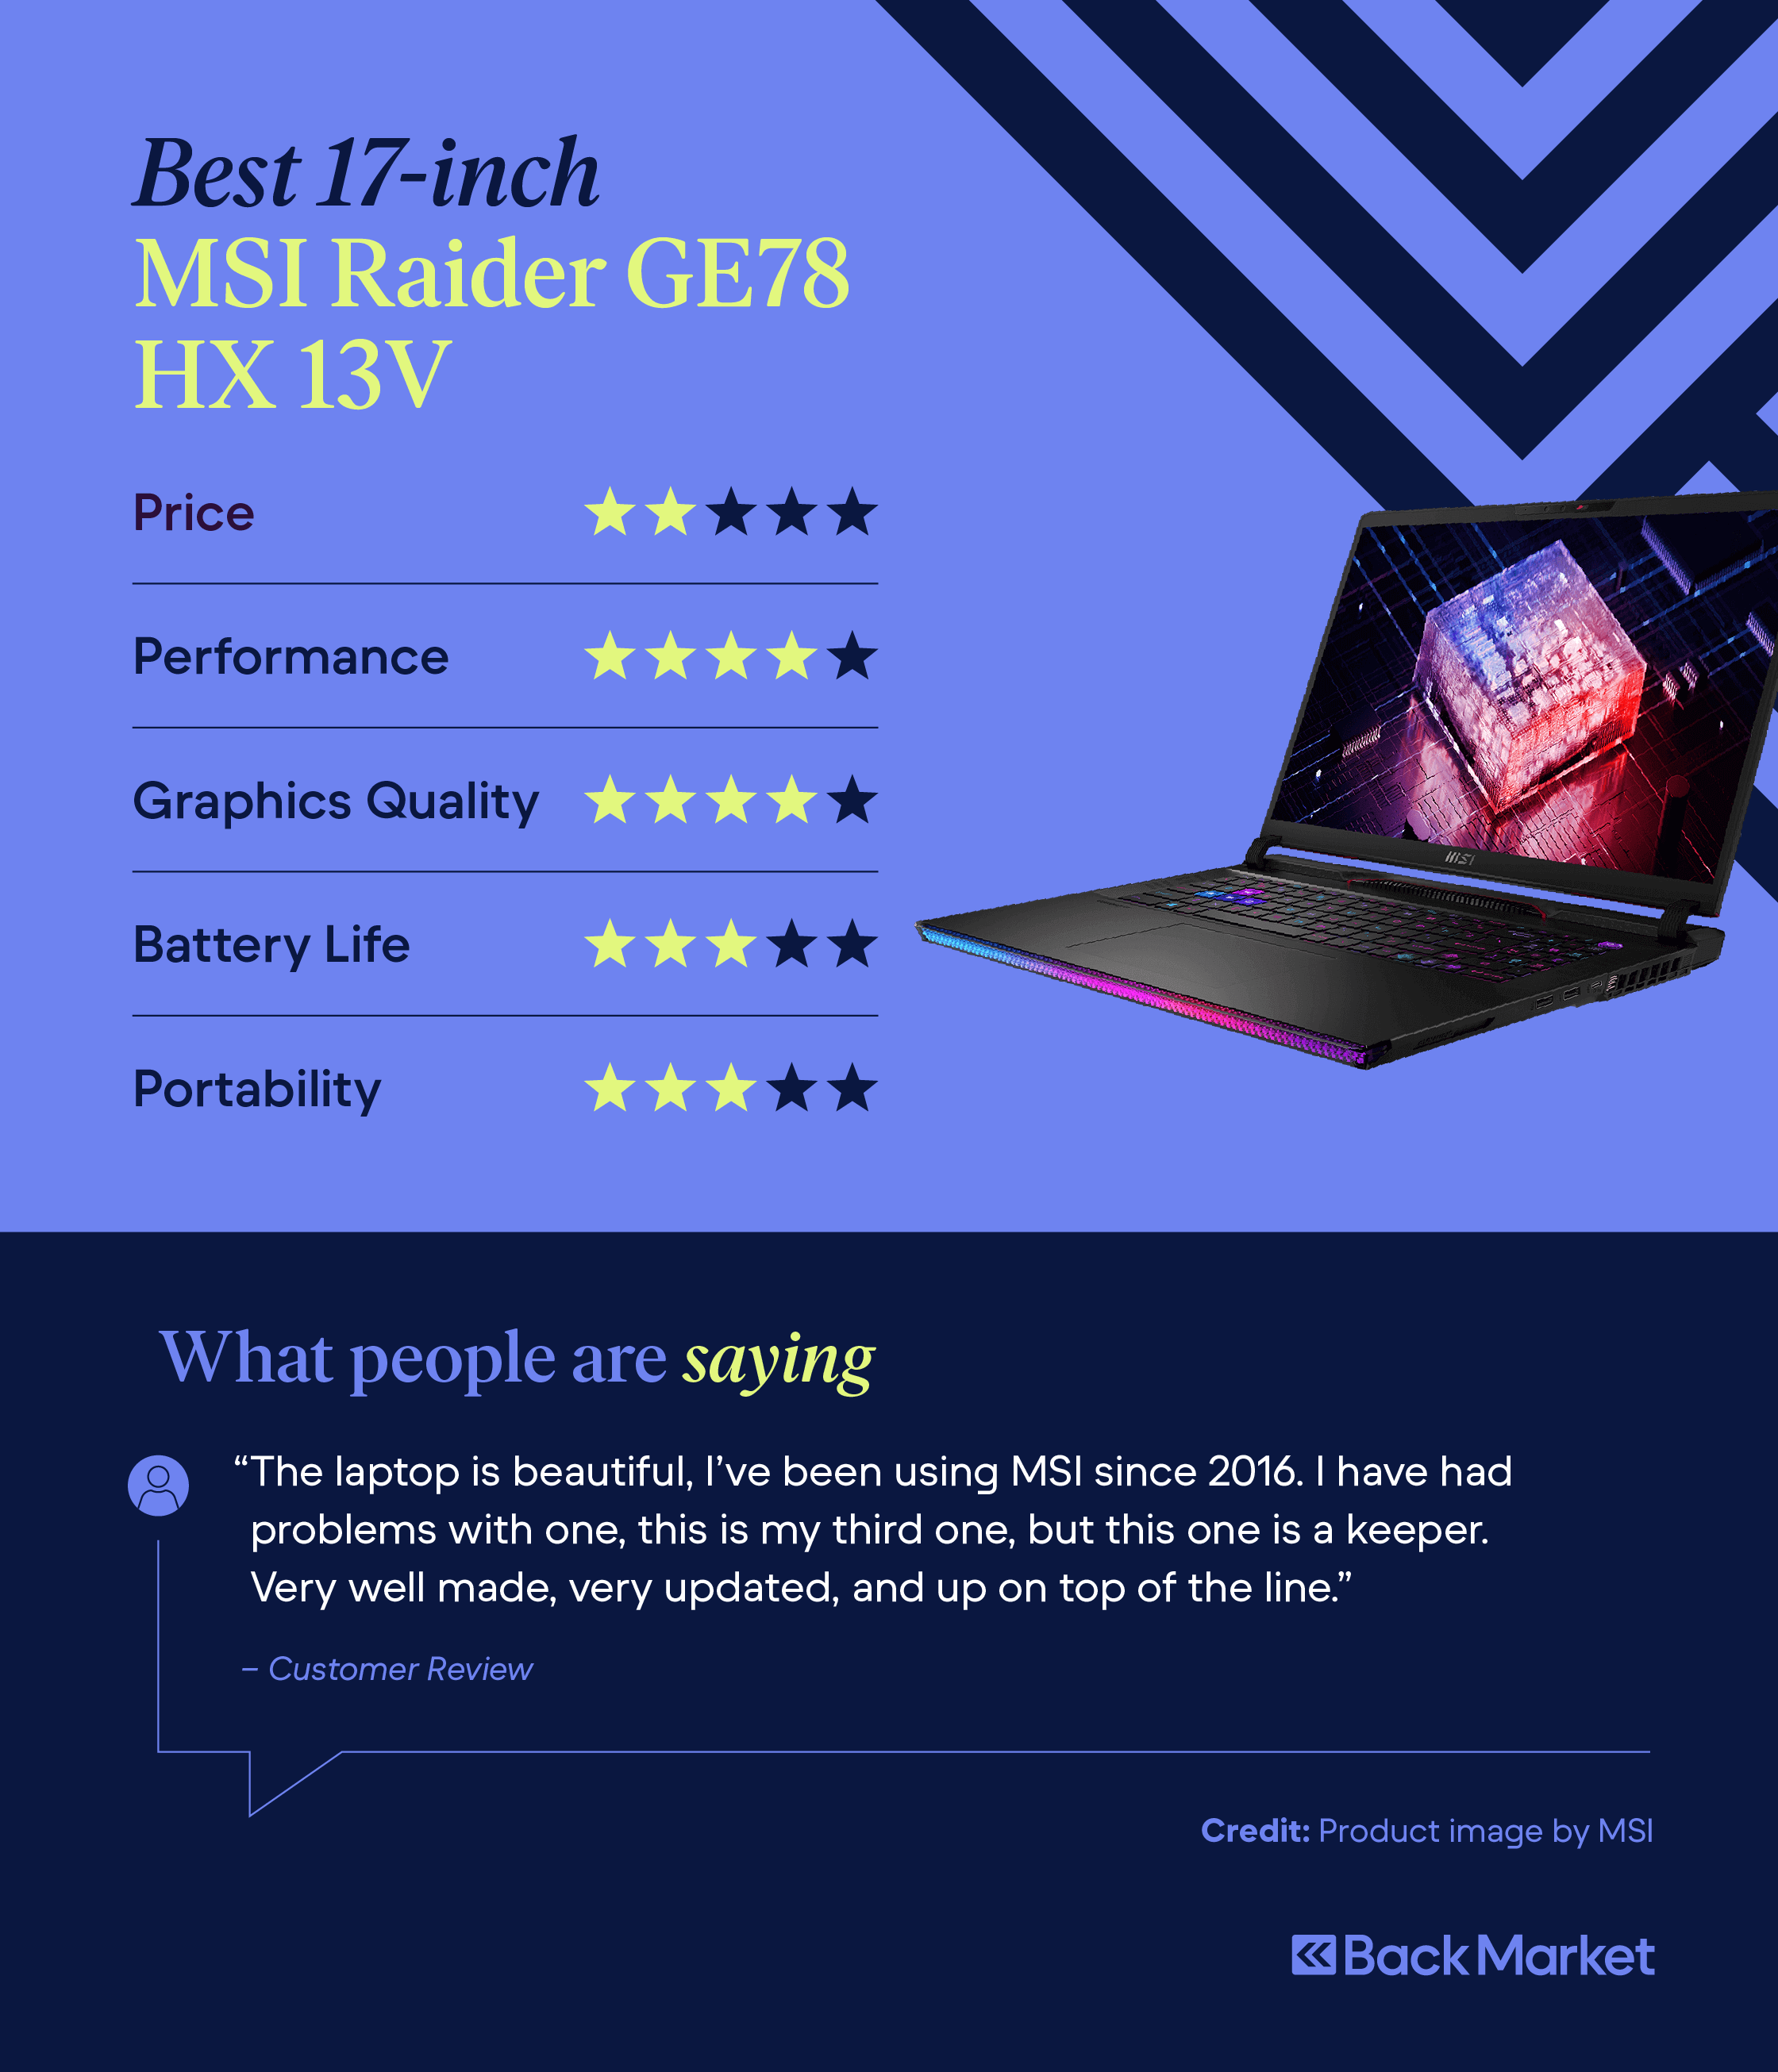 Best 17-inch gaming laptop